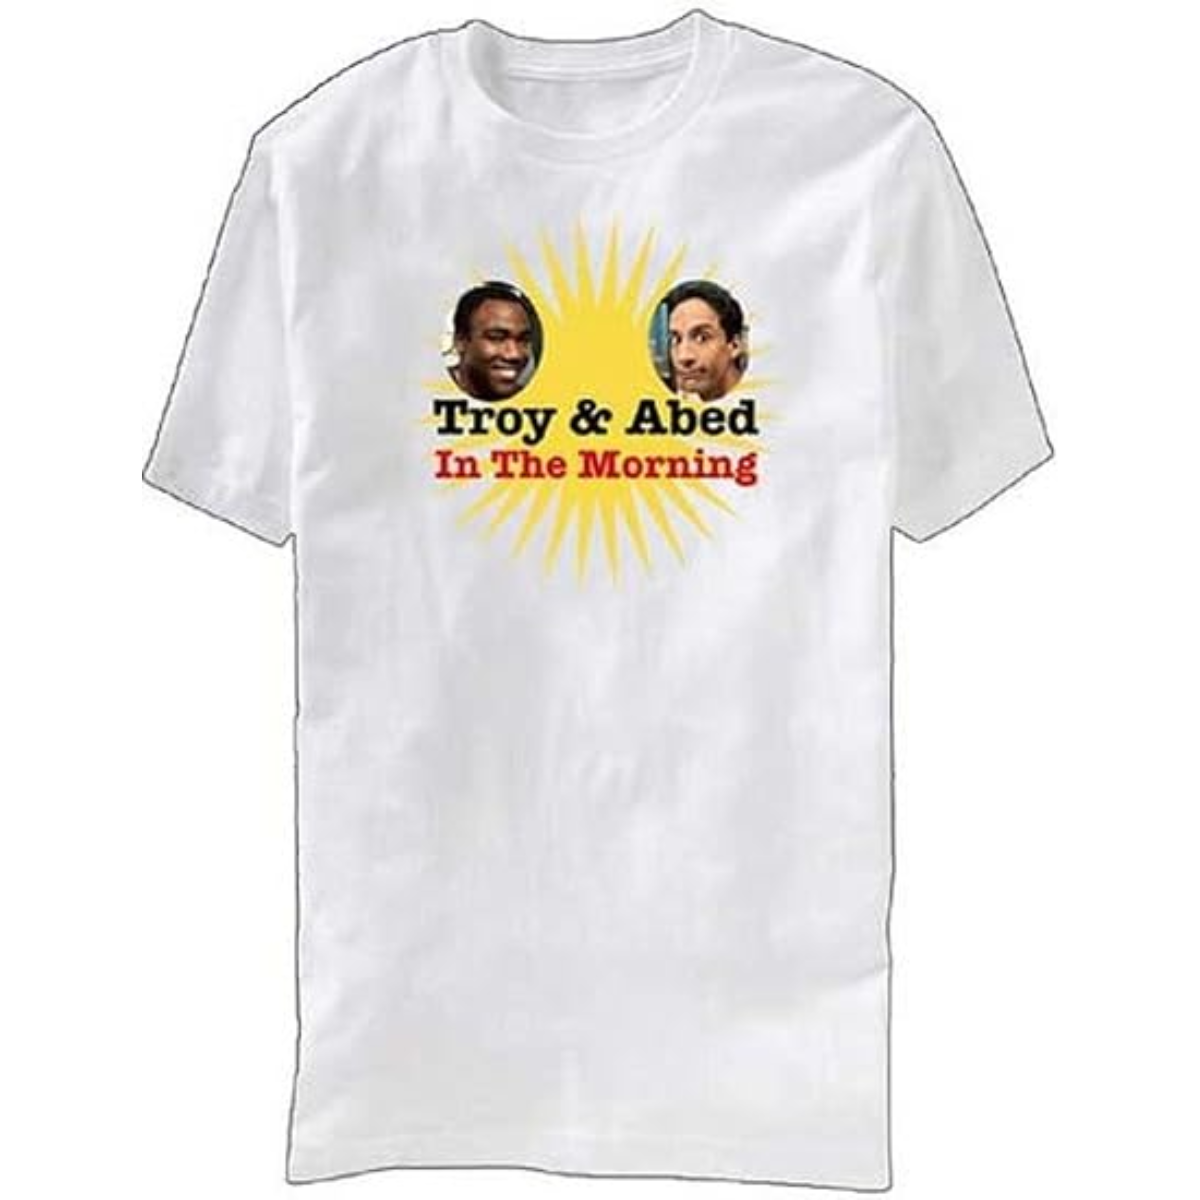 Troy and Abed in The Morning Adult T-Shirt